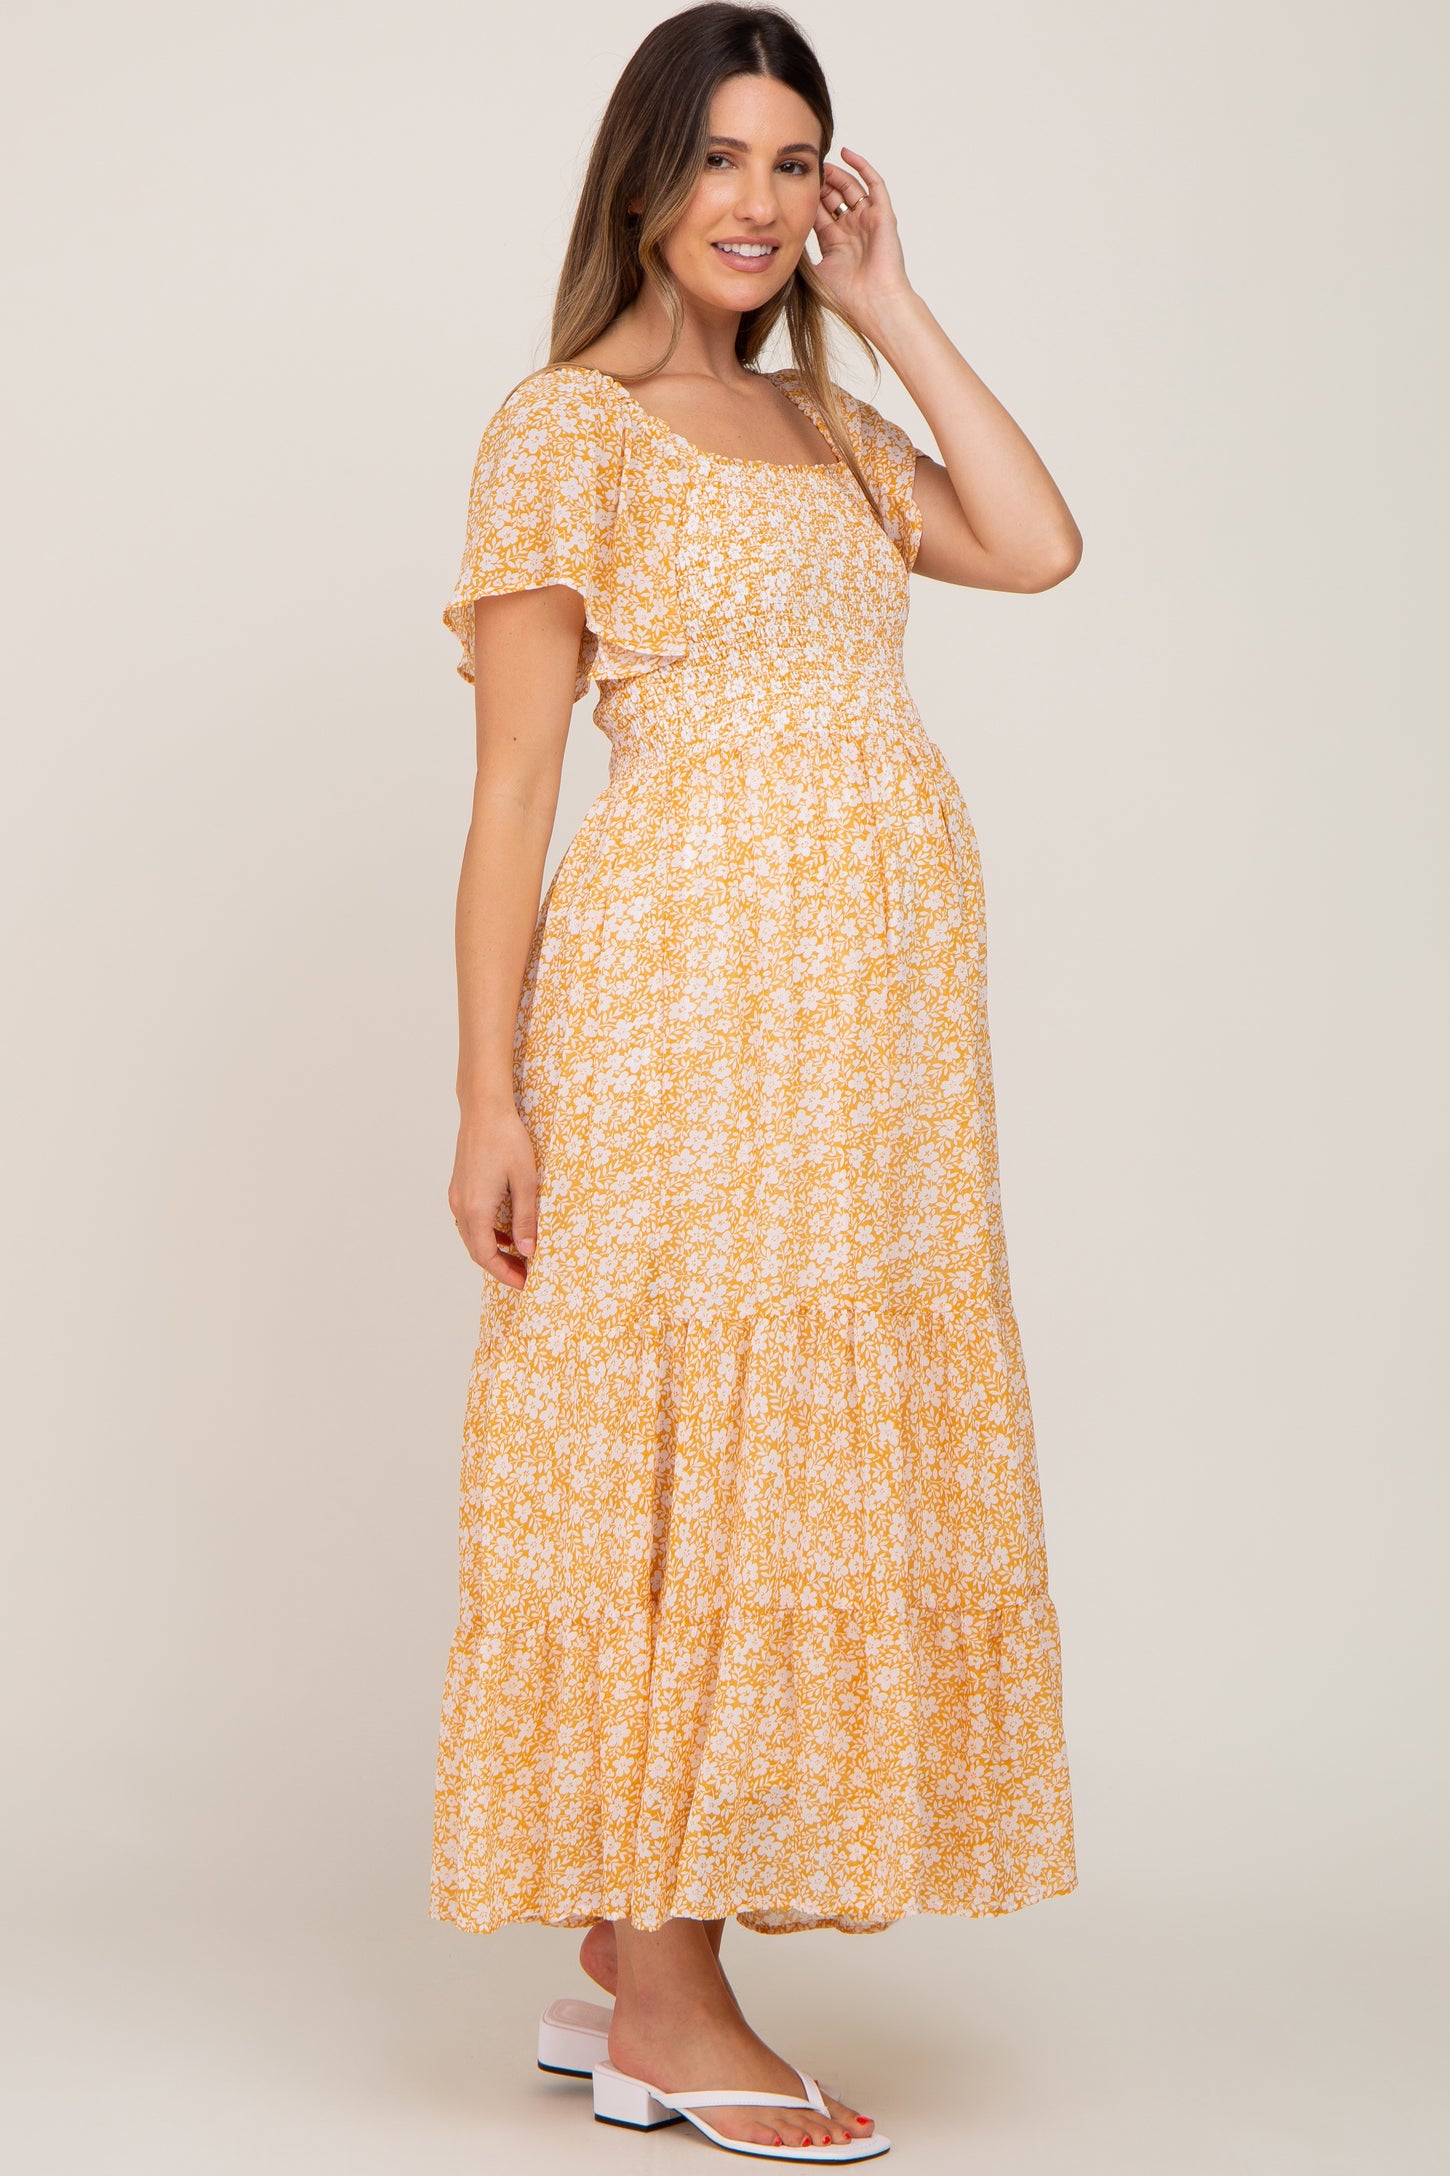 Mustard Floral Smocked Tiered Maternity Maxi Dress